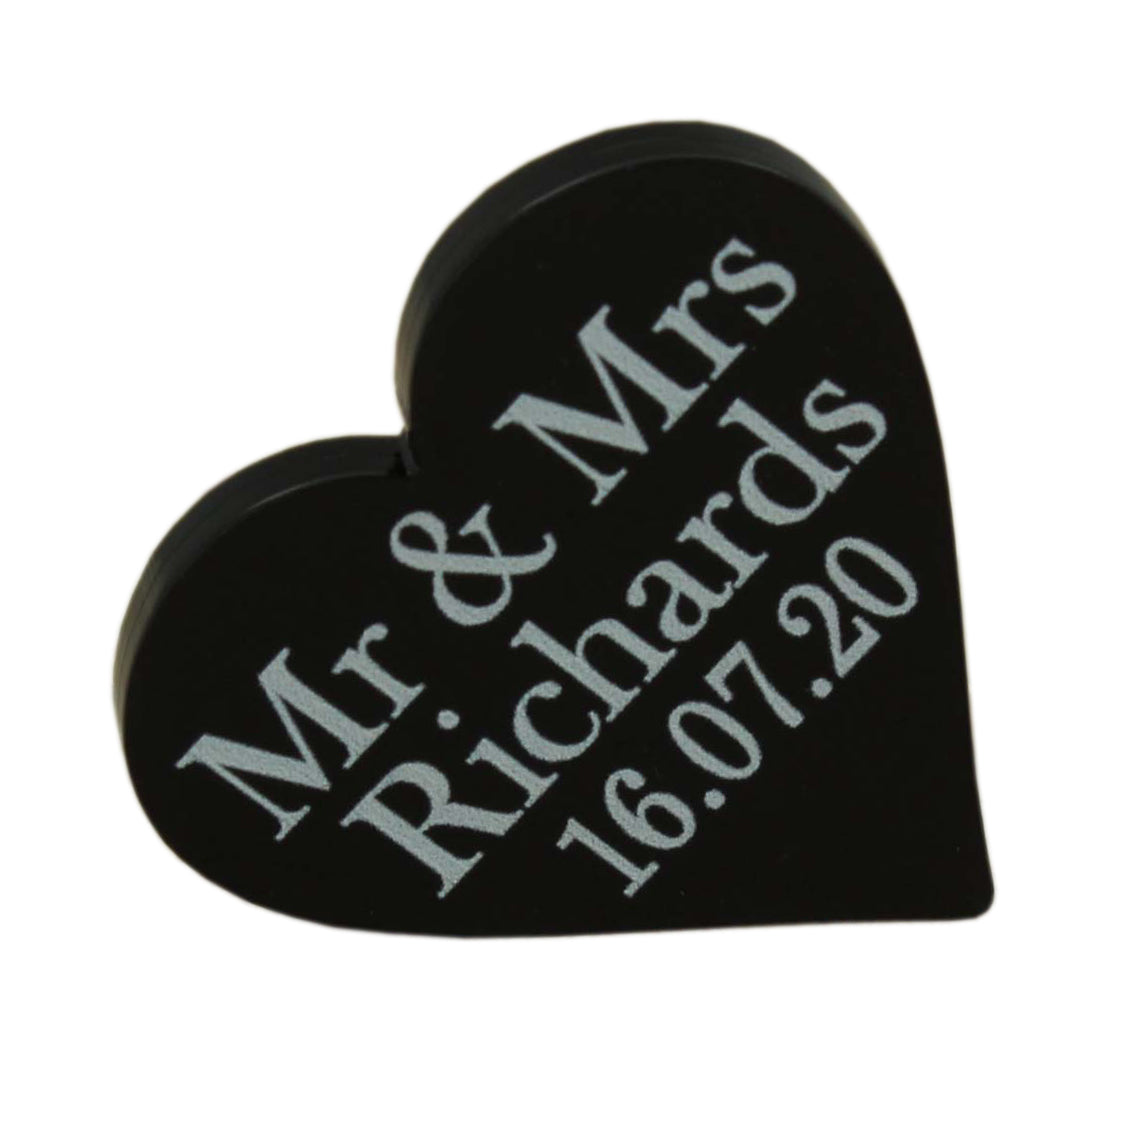 Personalised Wedding Favours - Frosted Black Acrylic Love Hearts